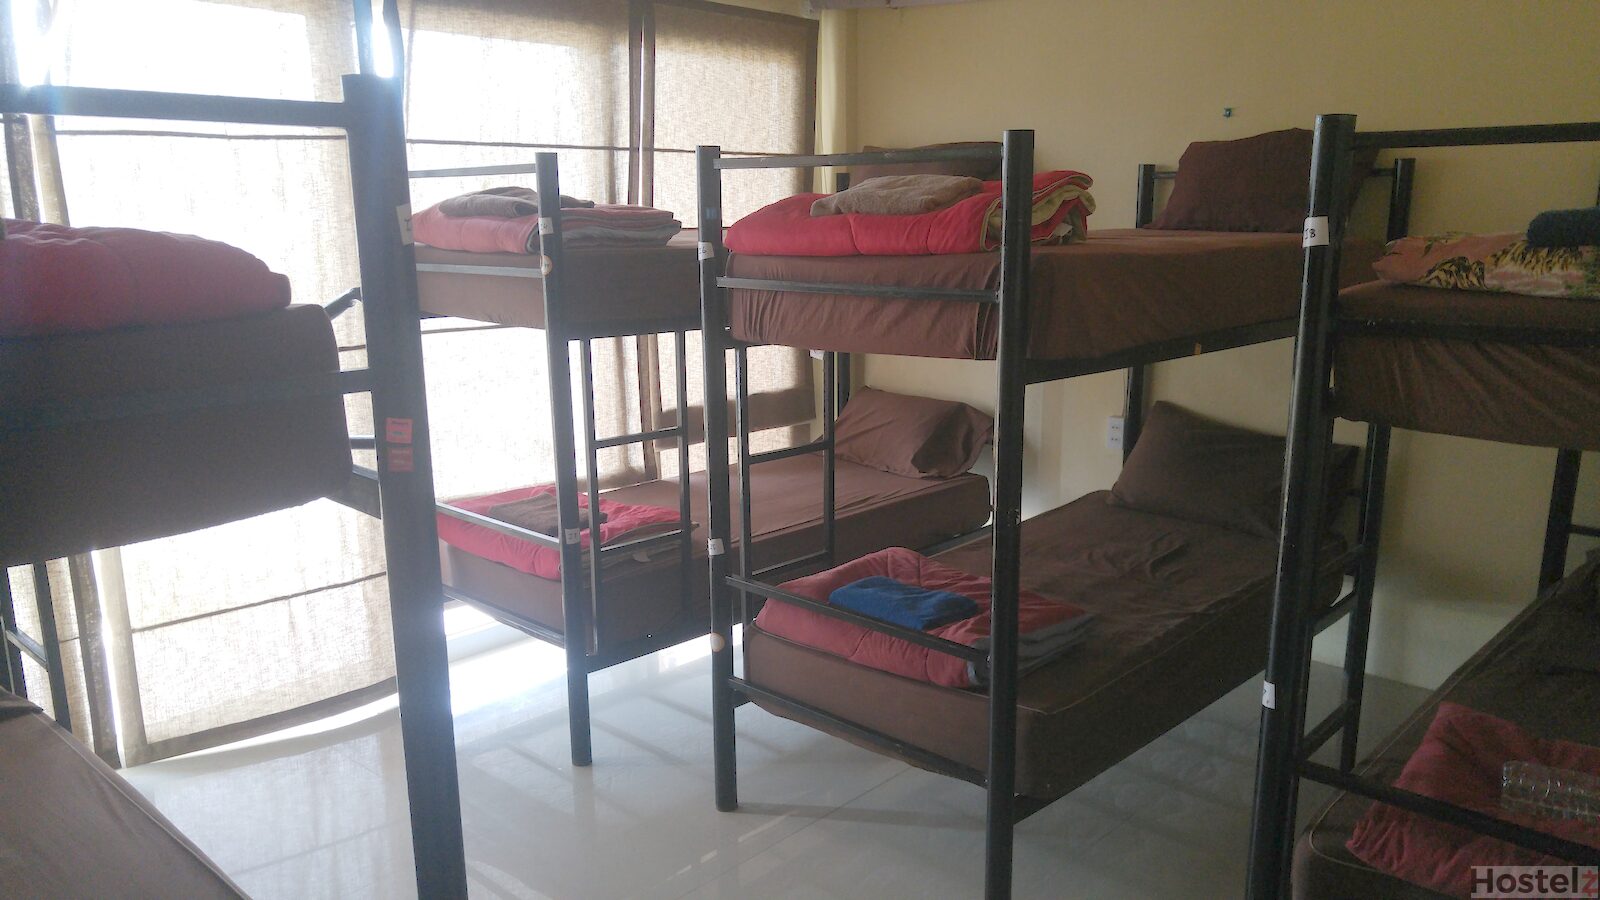 Dormitory beds